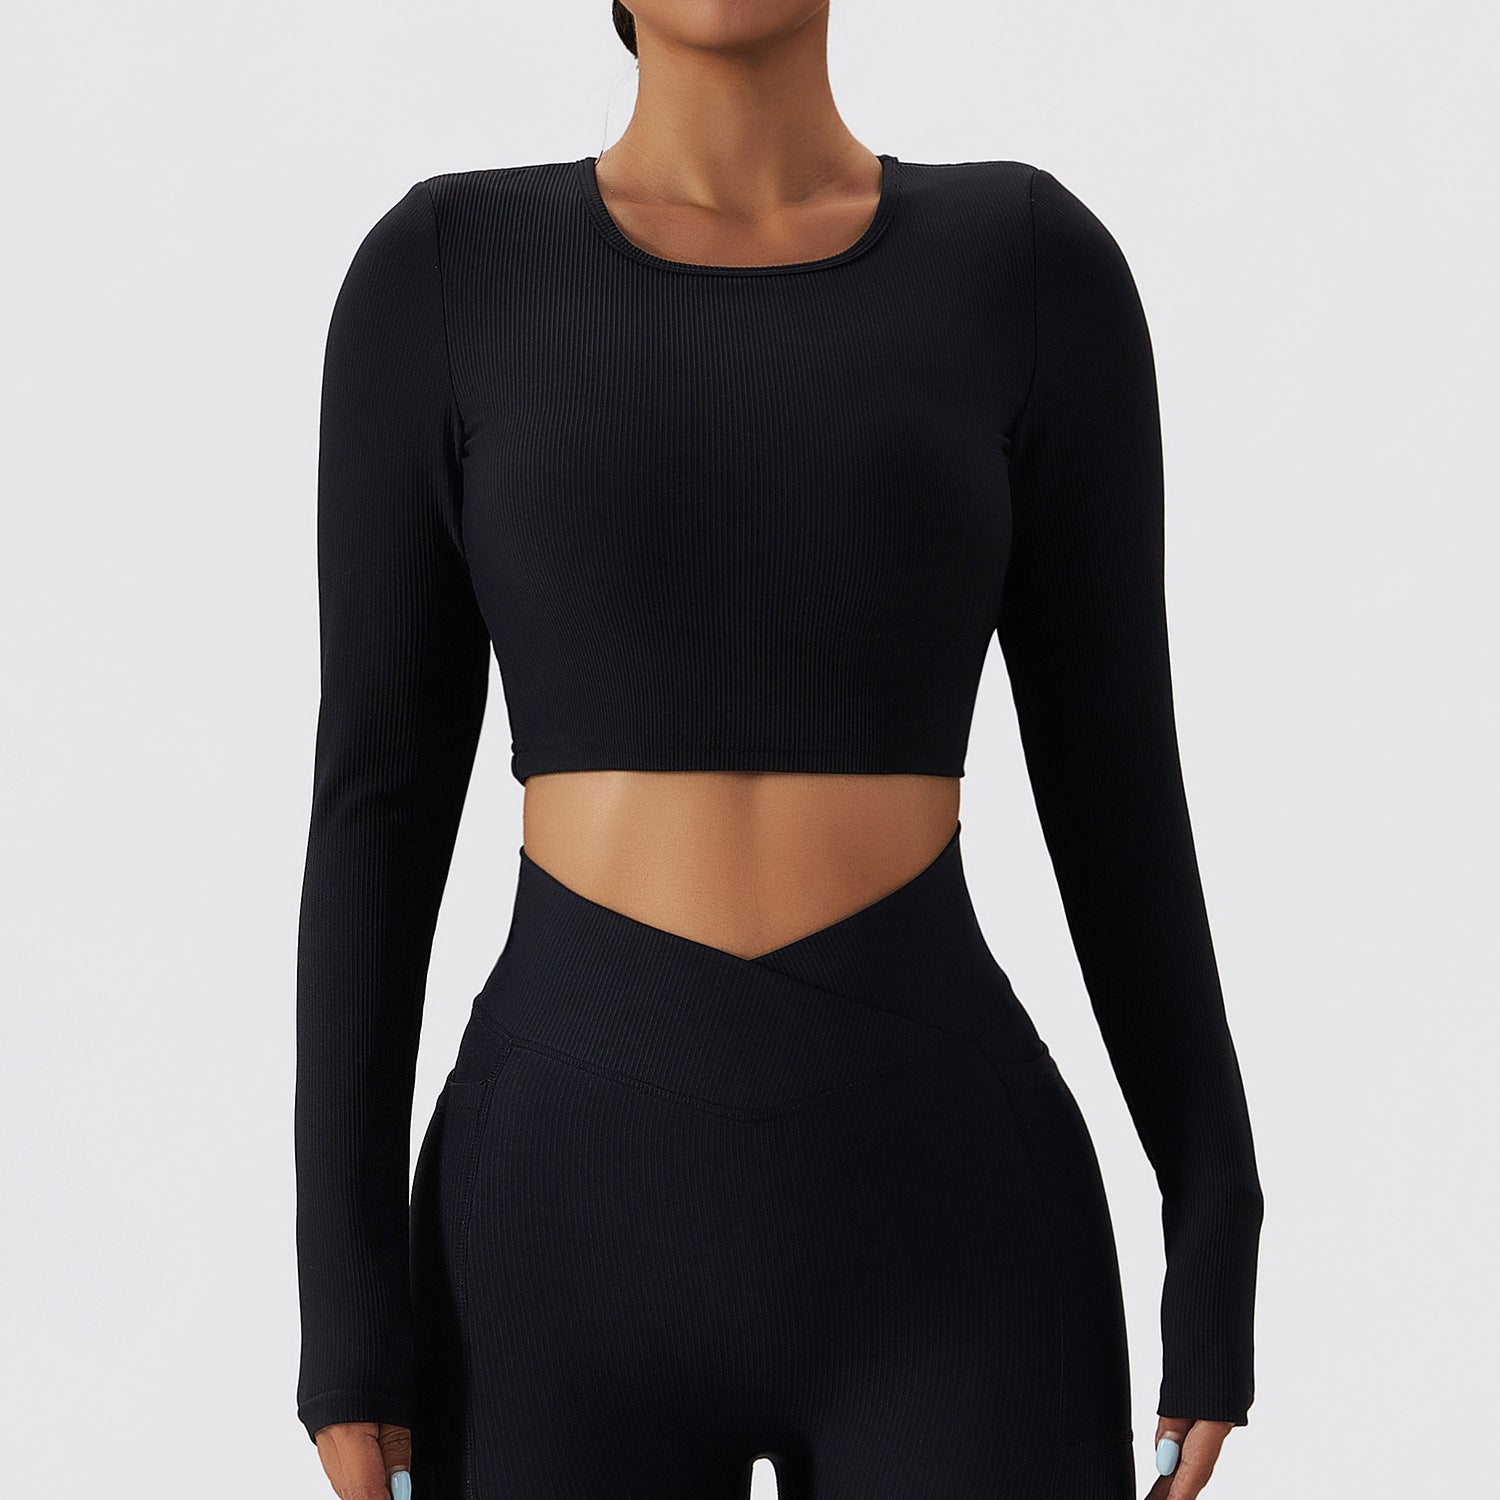 Threaded cutout quick-drying sports top